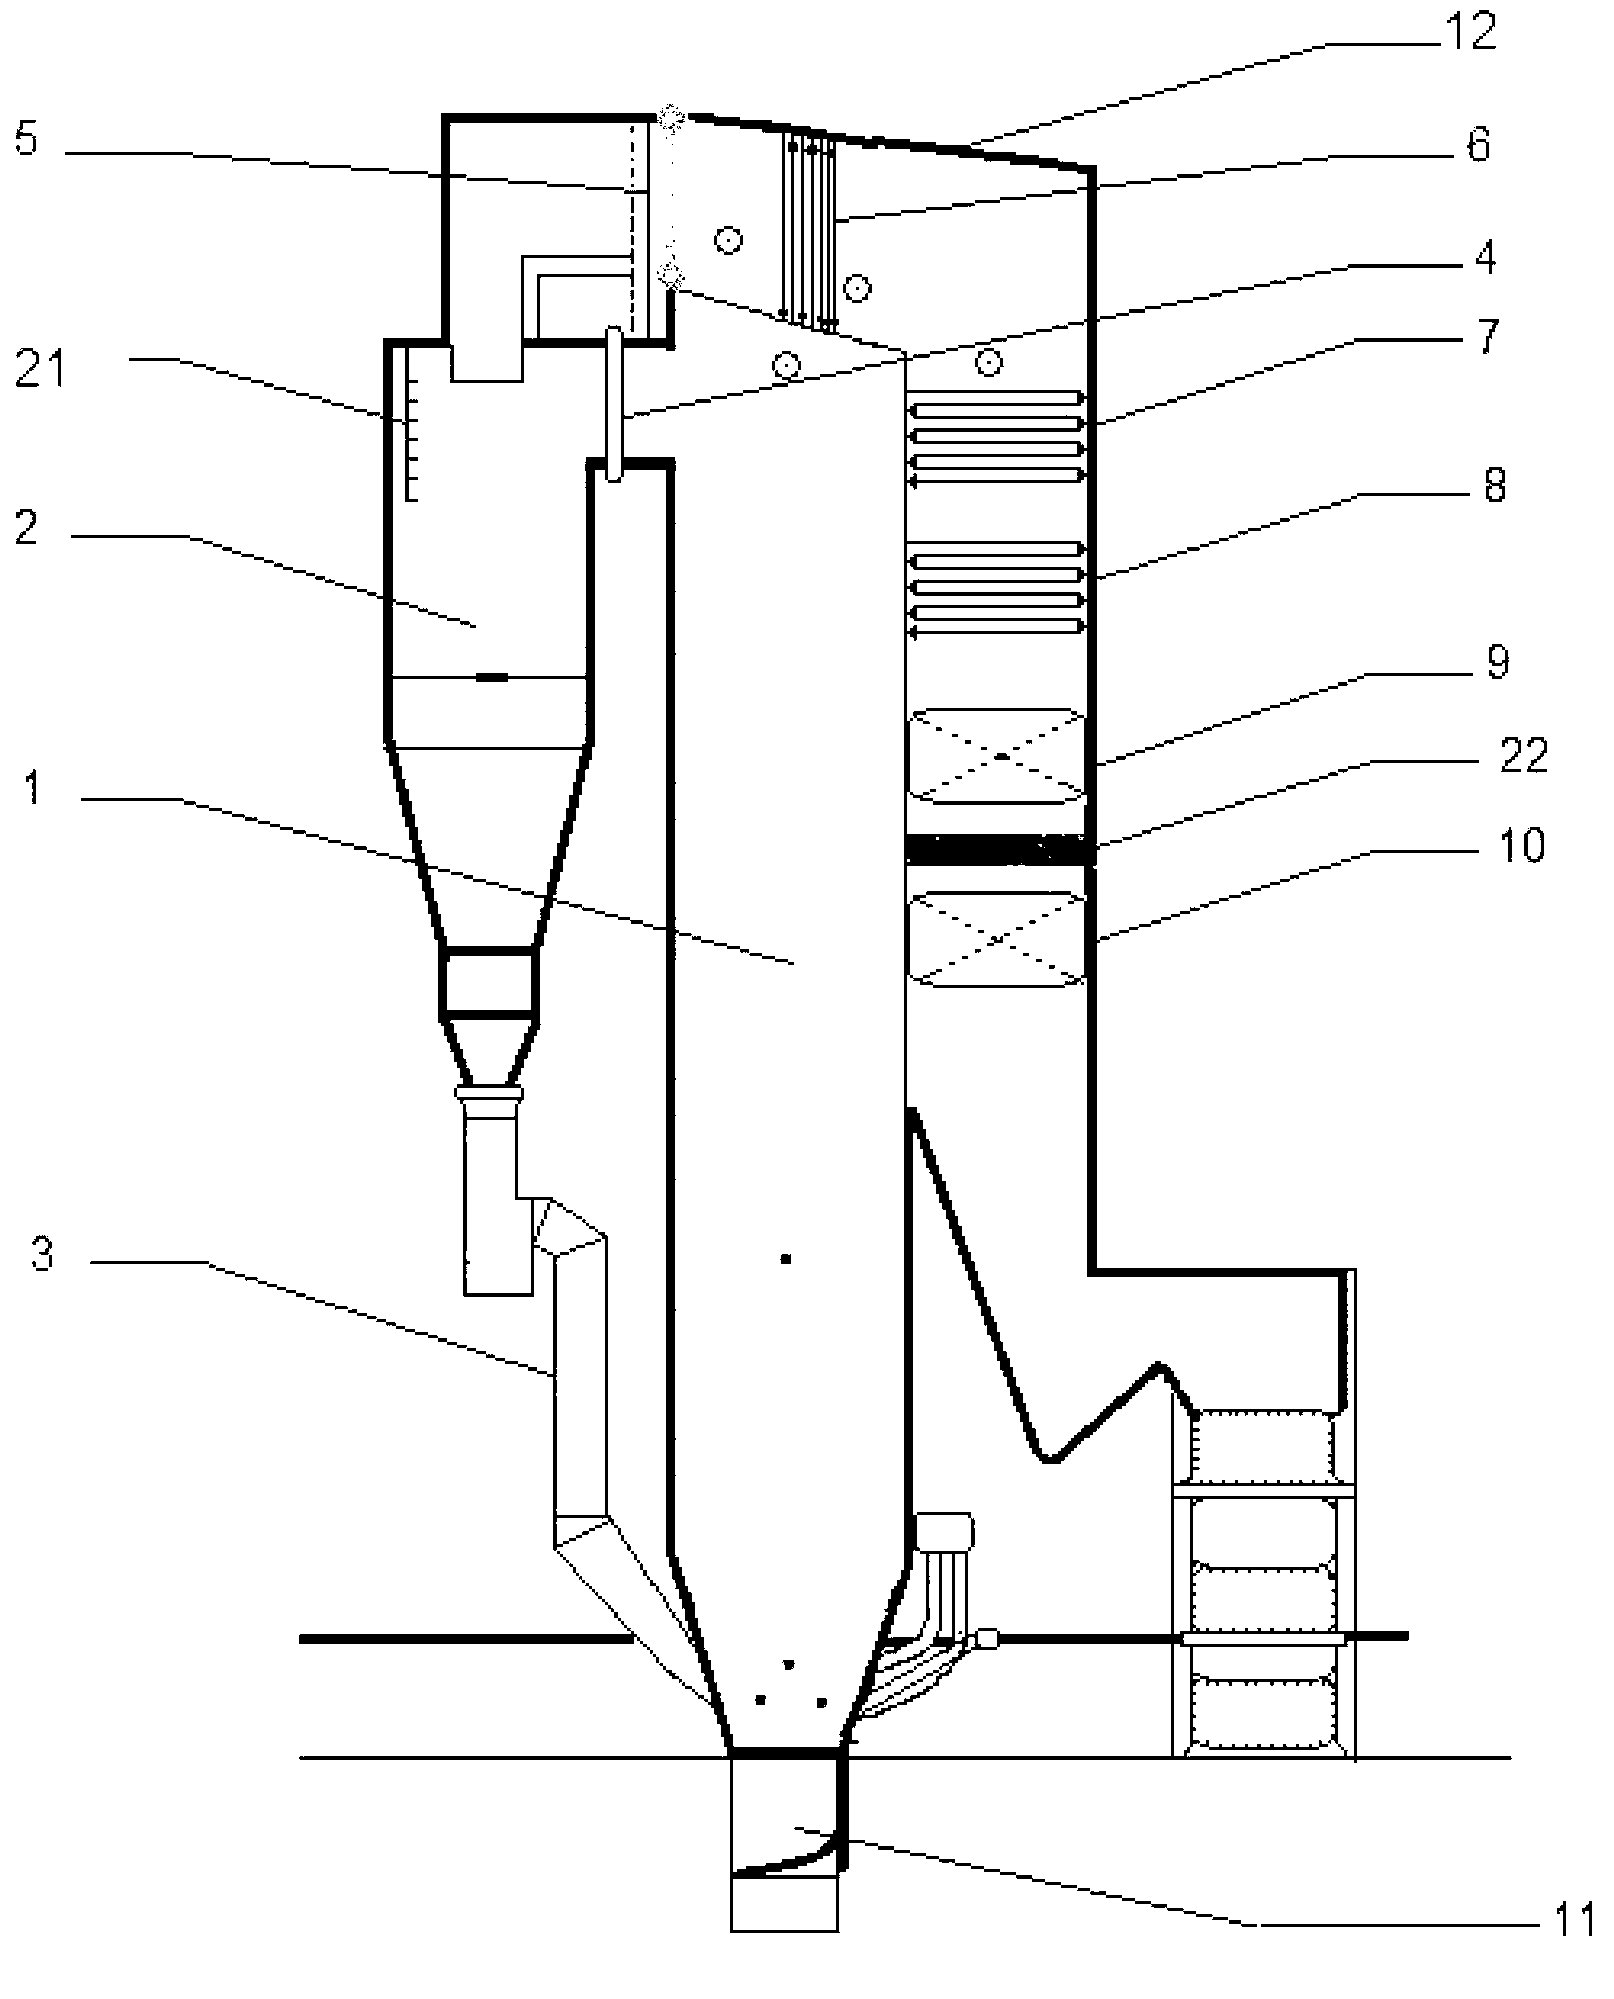 Fume gas denitration system of coal-fired boiler based on SNCR (Selective Non-catalytic Reduction) and SCR (Selective Catalytic Reduction) combination method